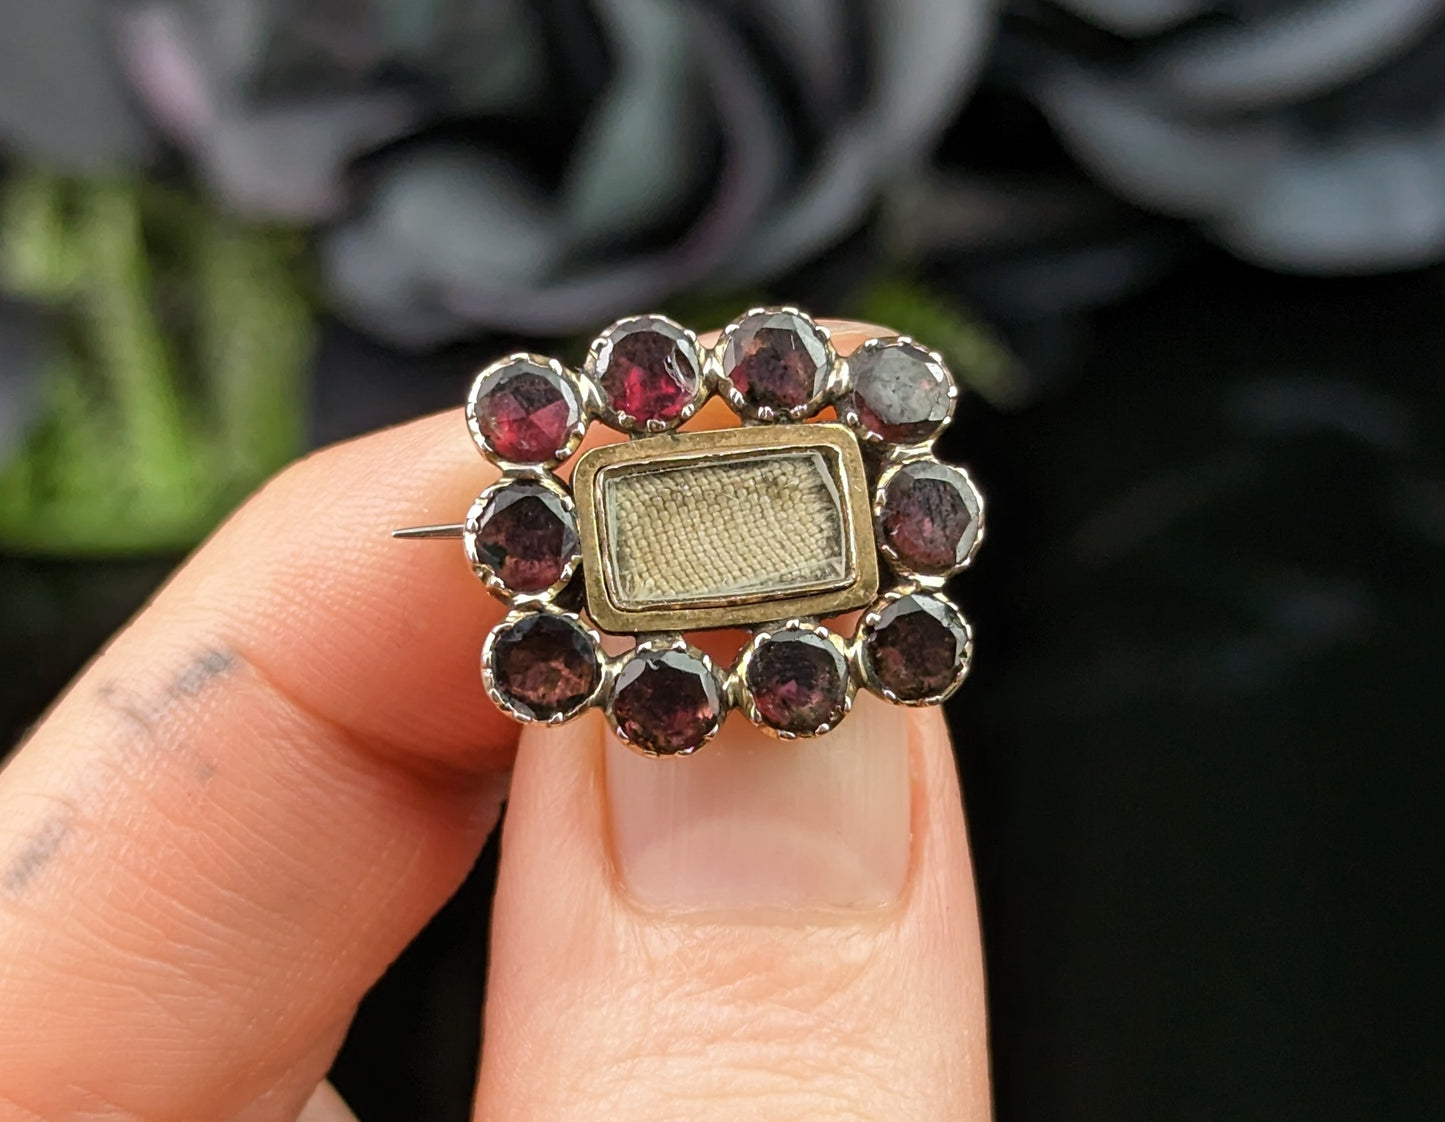 Antique Victorian mourning brooch, 9ct gold, Flat cut Garnet, Lace pin